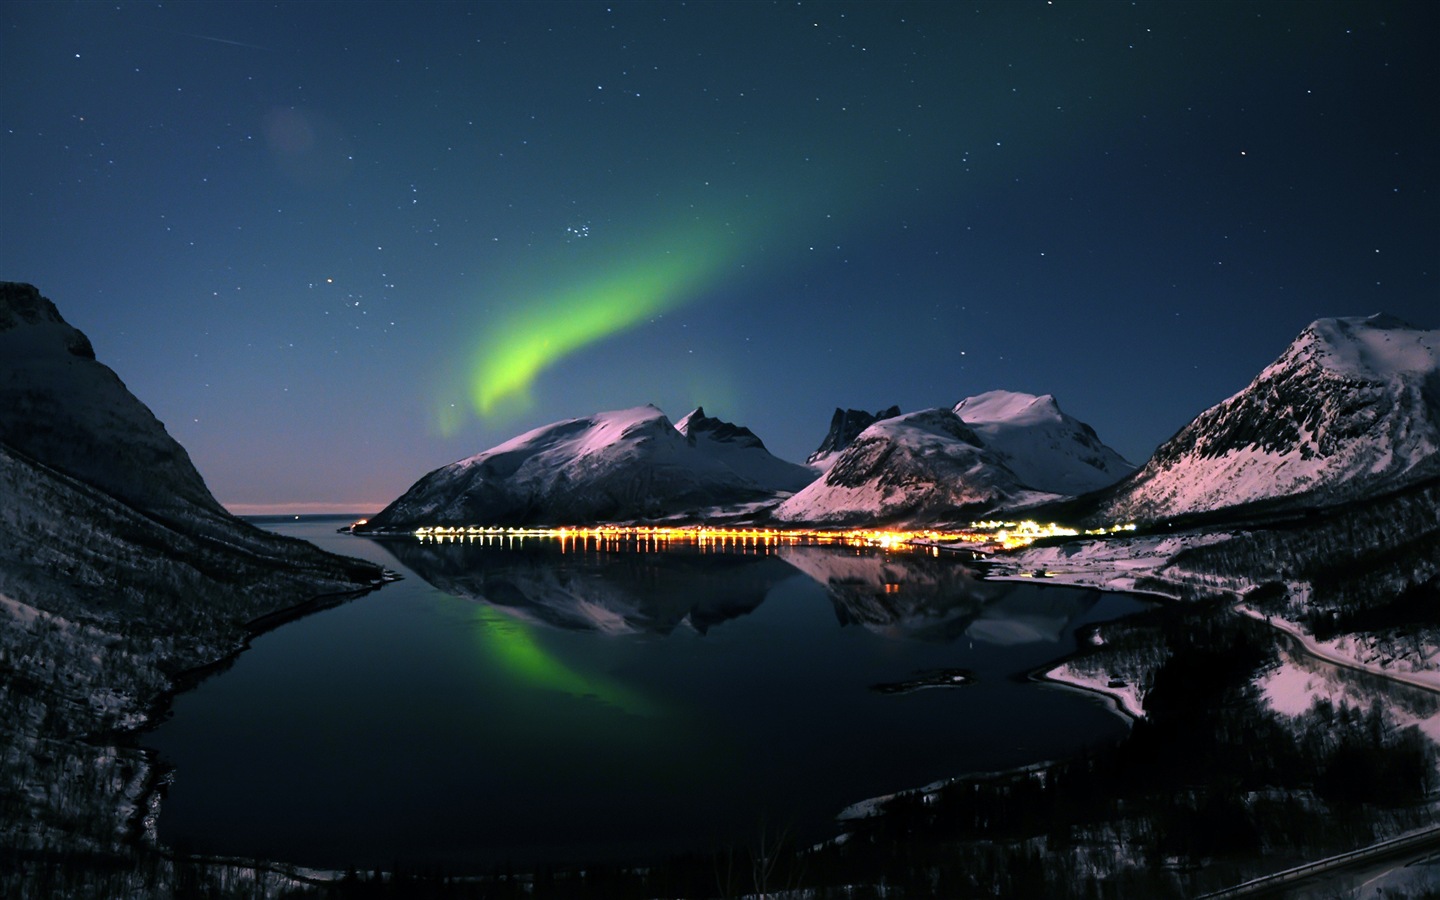 Natural wonders of the Northern Lights HD Wallpaper (2) #2 - 1440x900